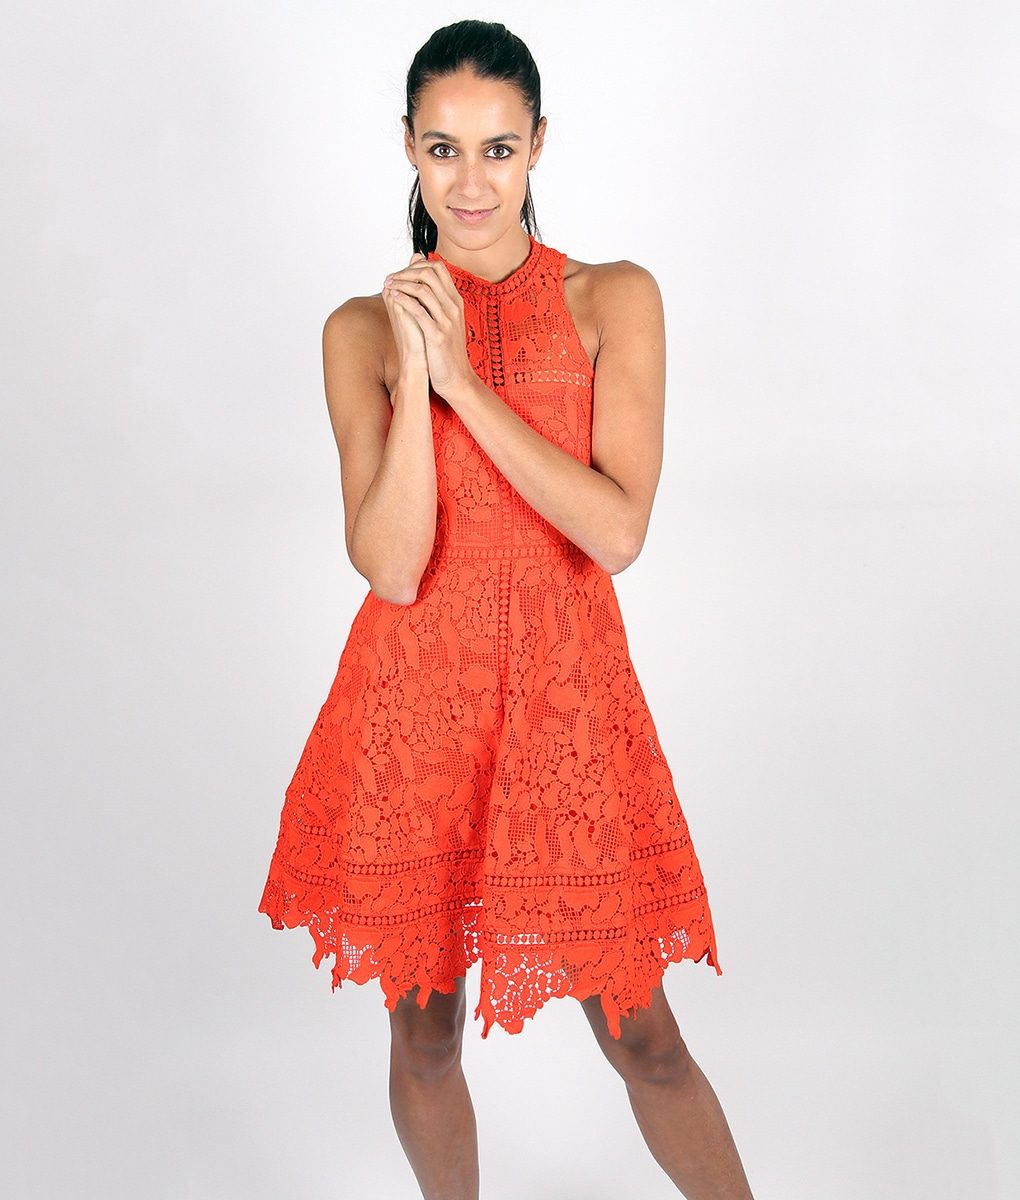 Alila-Tomatoe-Red-Lace-Crochet-Dress-by-Lumier-by-Bariano